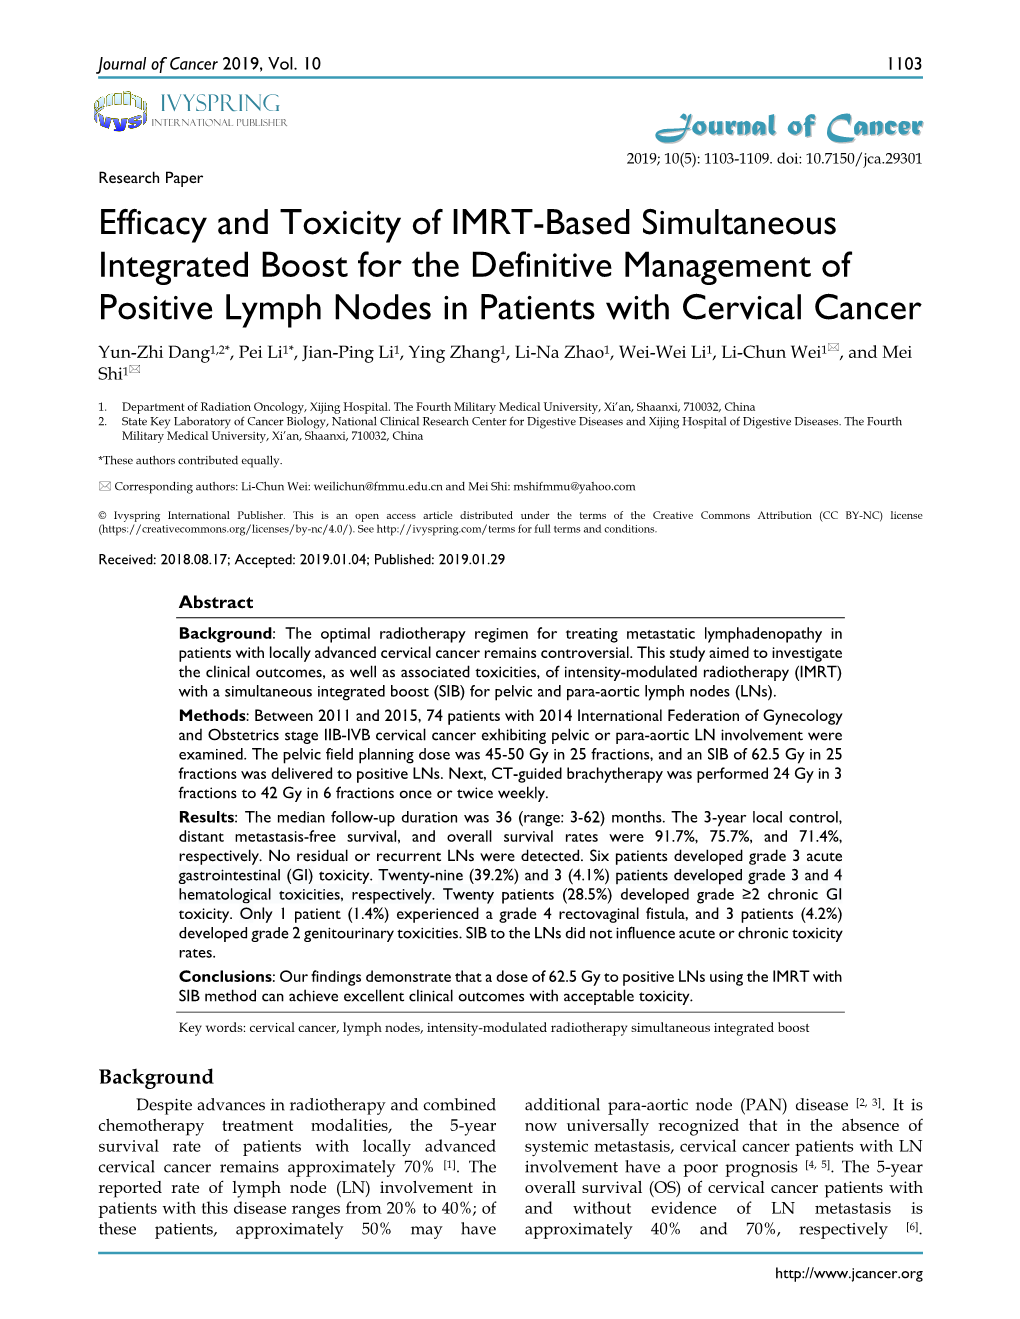 Efficacy and Toxicity of IMRT-Based Simultaneous Integrated Boost For